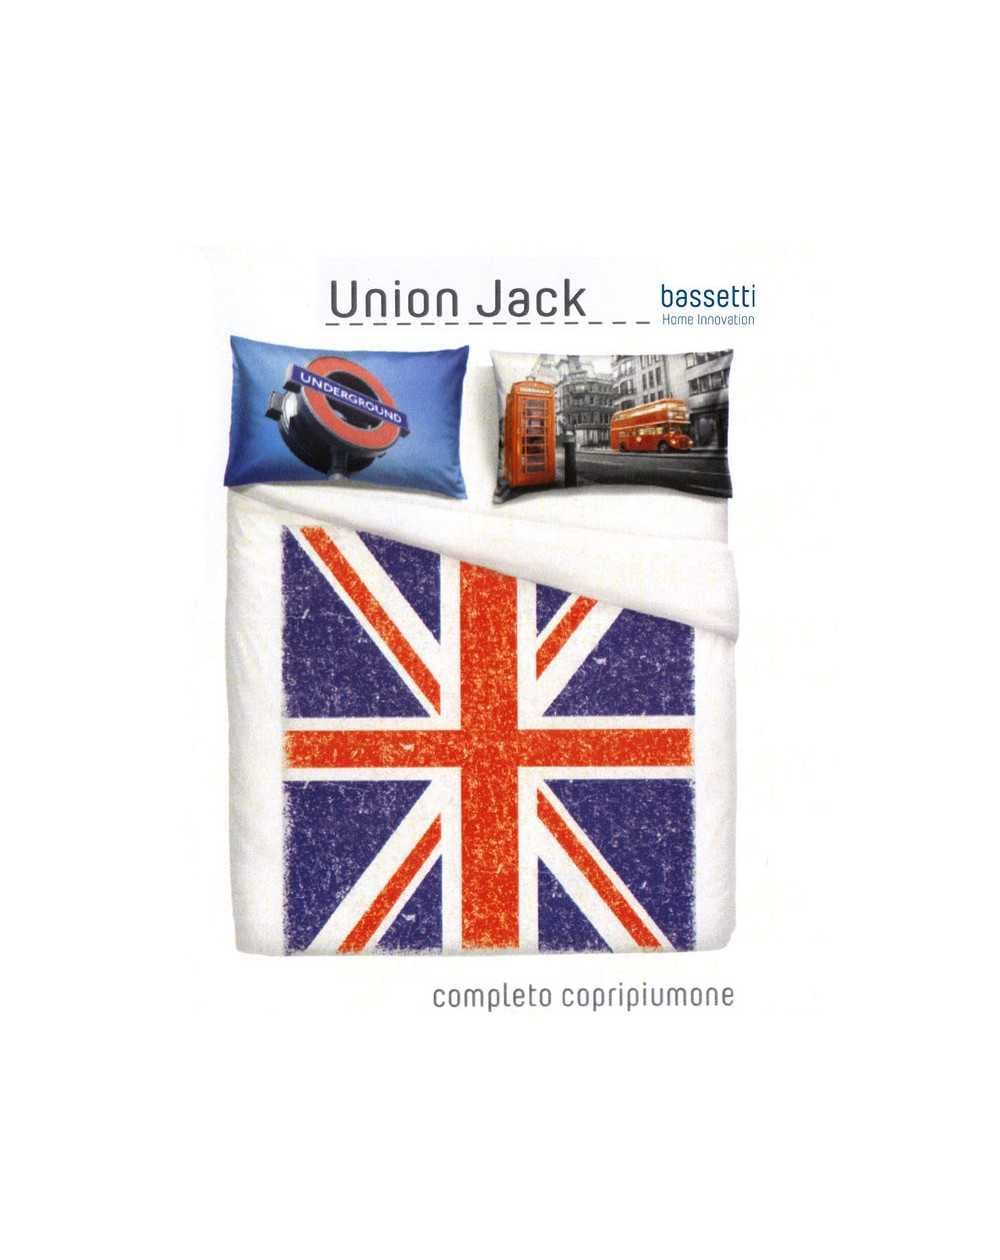 Duvet Set cover a fitted sheet and two pillow cases Union Jack BY BASSETTI